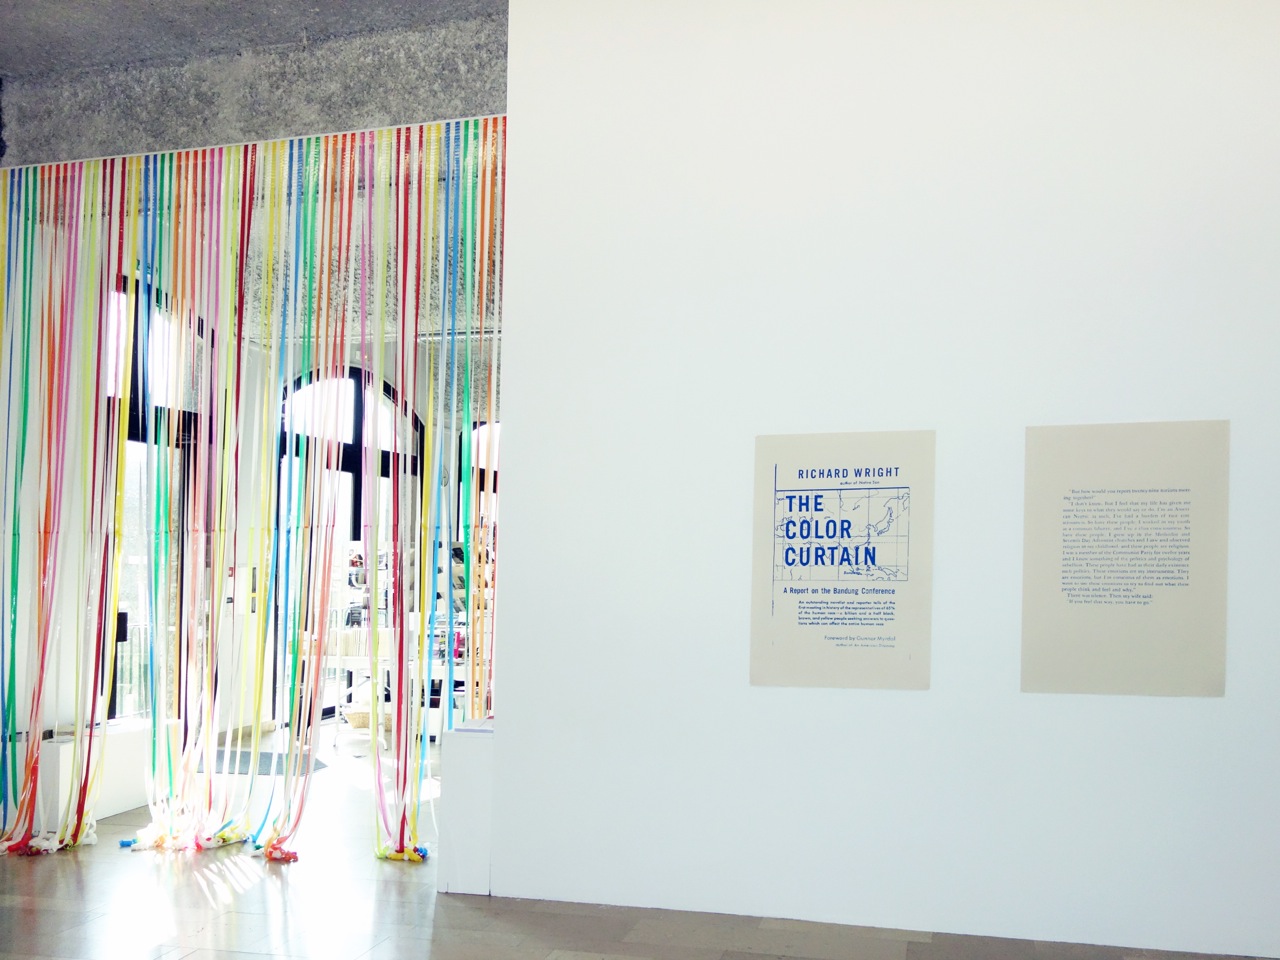 The Colour curtain, a view of Nathalie Muchamad exhibition. Photo: DR